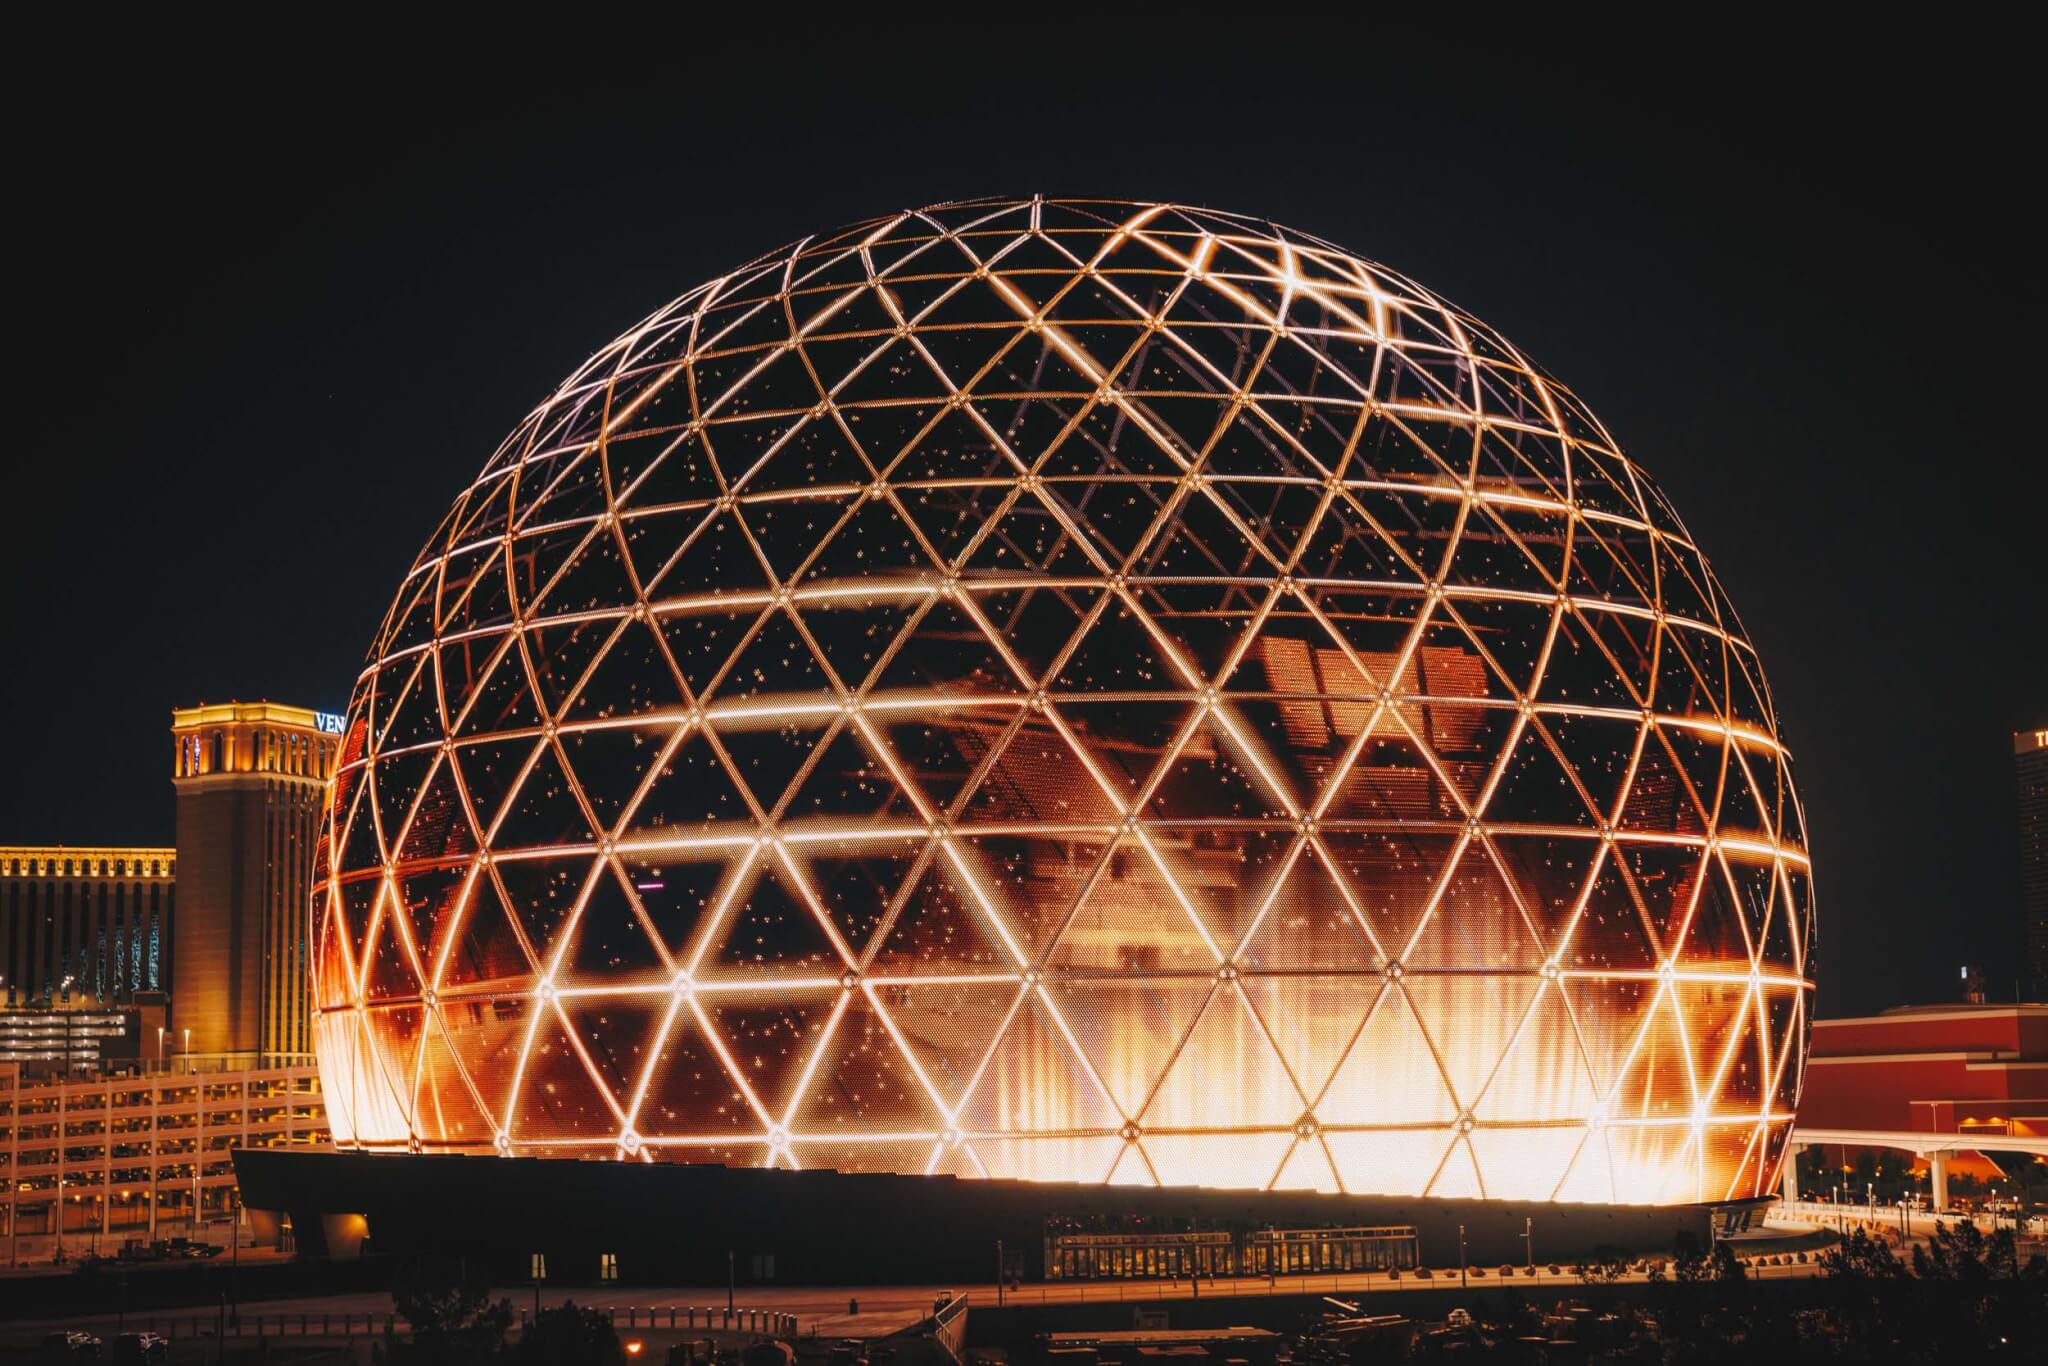 Largest spherical structural in the world lights up Las Vegas